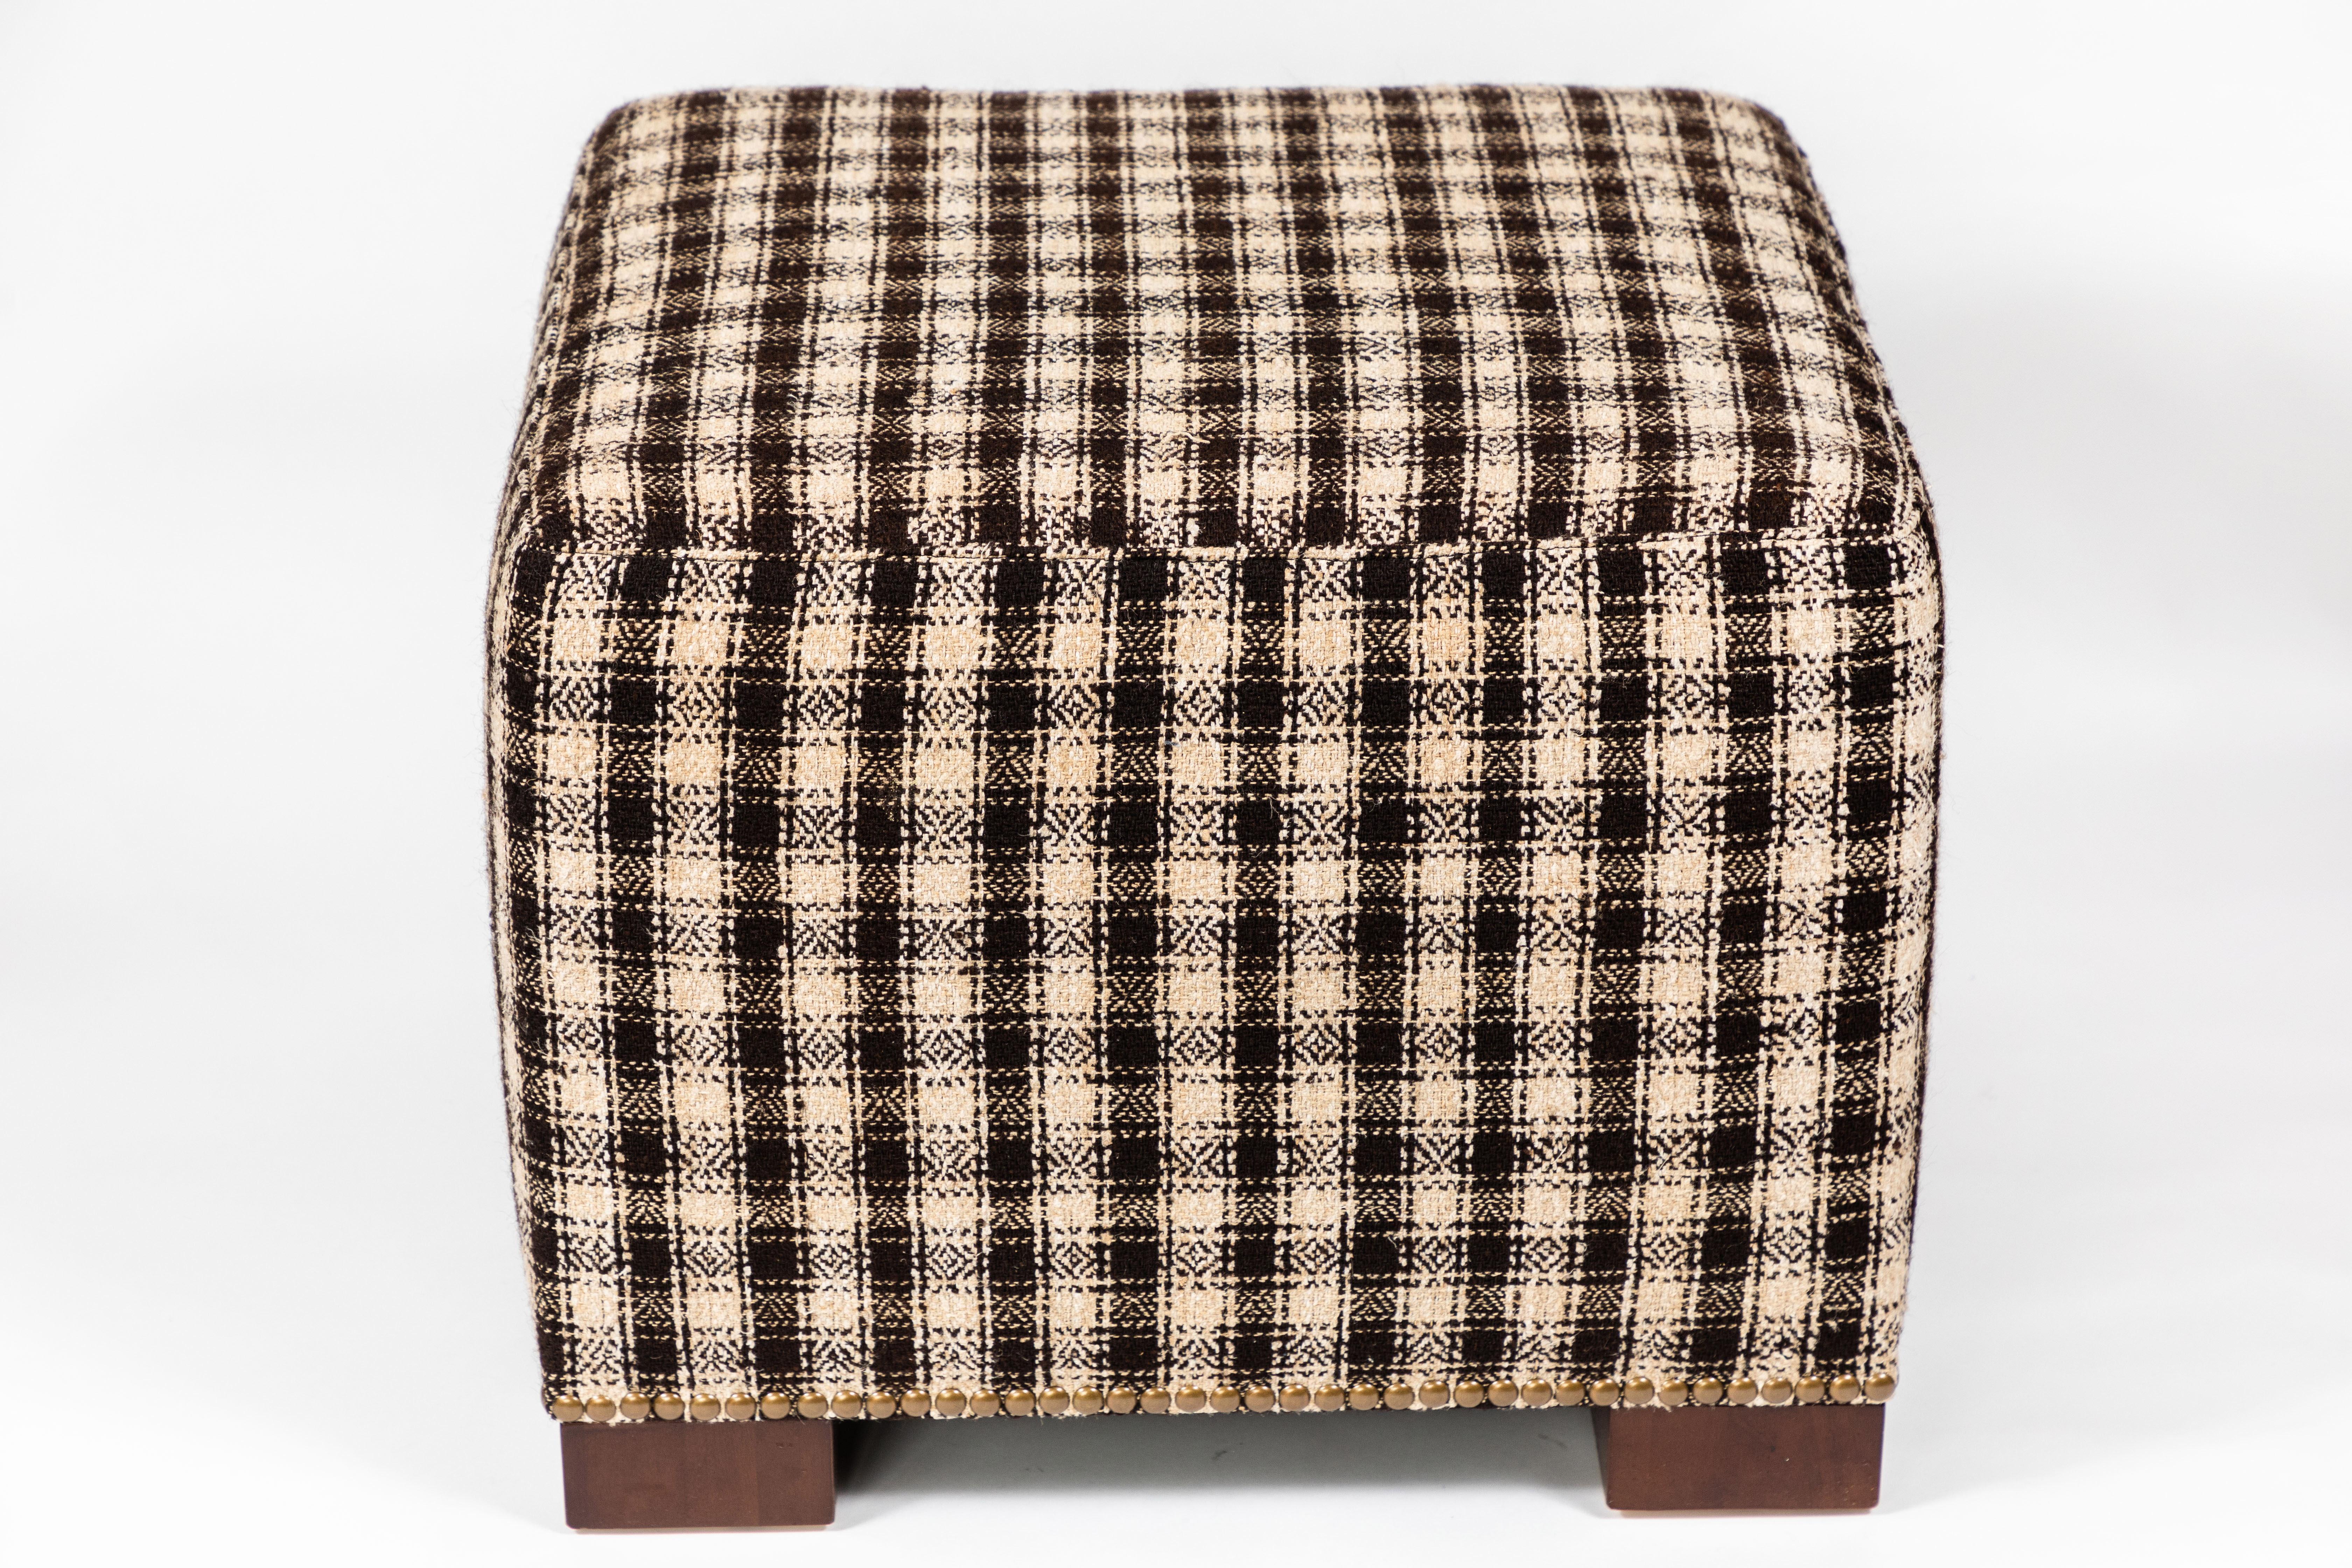 Limited Edition Cubes combine vintage textiles with custom-scaled pieces to create interesting and useful accent seating. Each piece is one of a kind. 

This custom-made ottoman with wood feet and nailhead trim features a Vintage Wool and Hemp Wagon